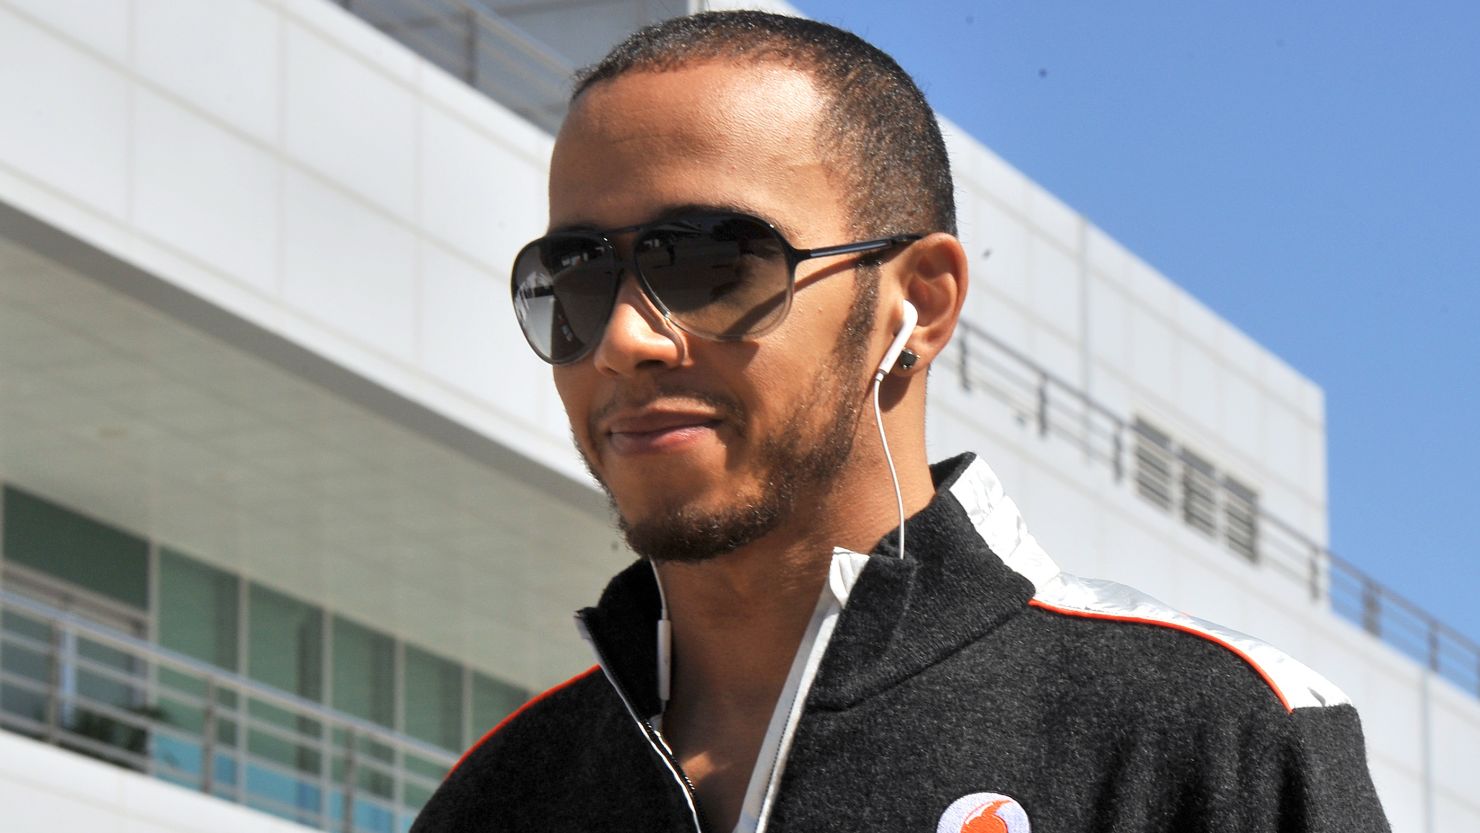 Lewis Hamilton took part in 110 grands prix for McLaren before agreeing to join Mercedes.